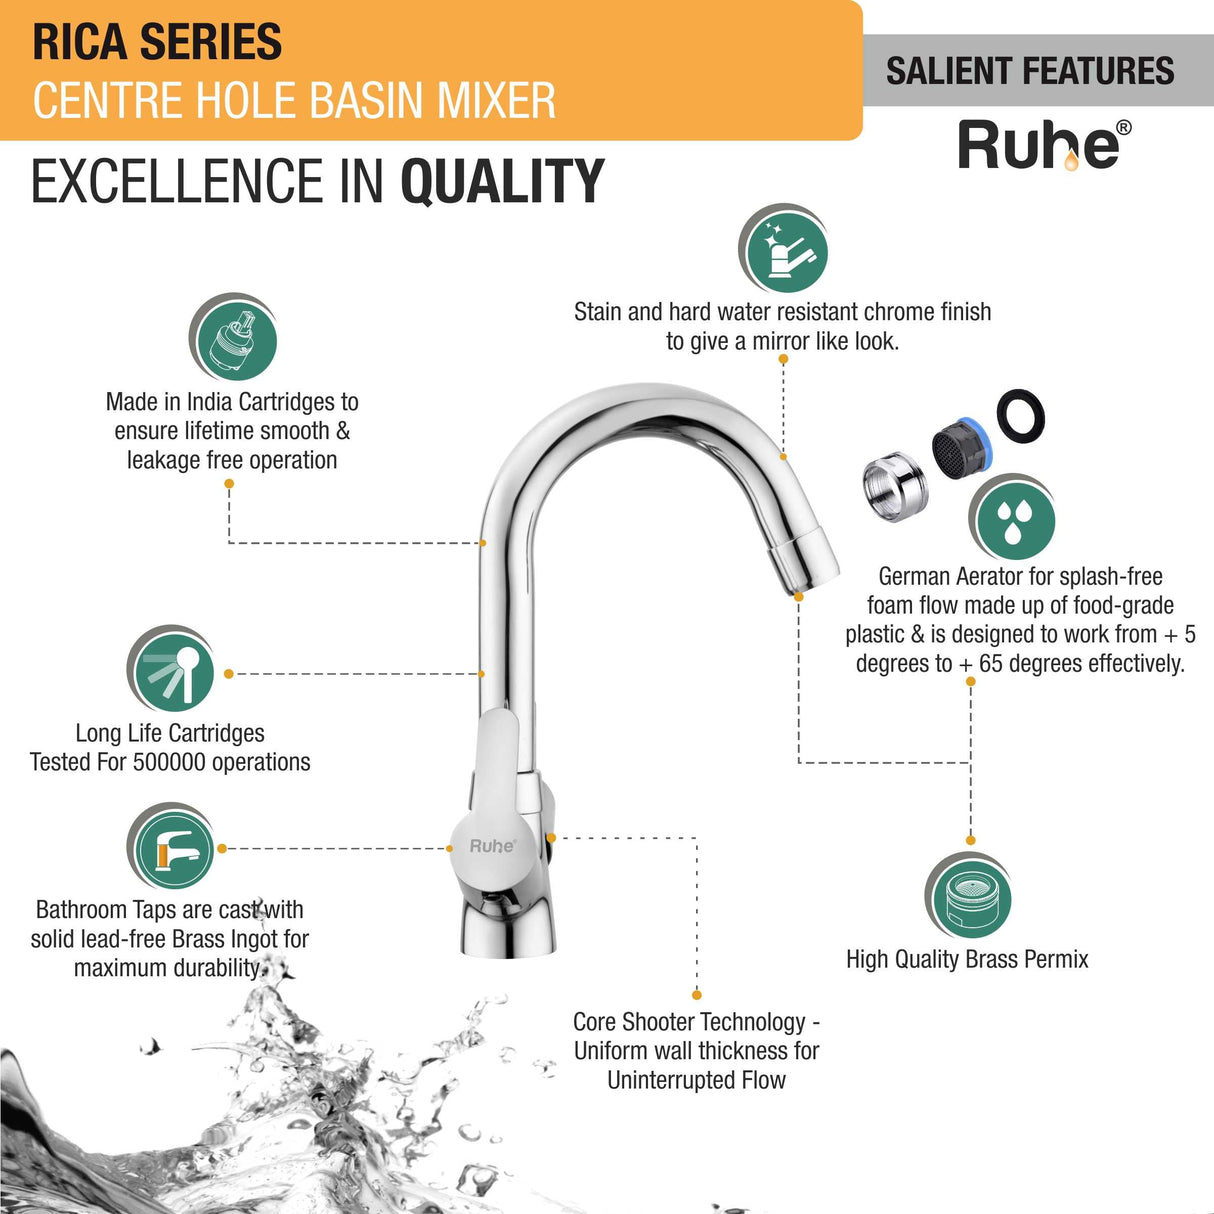 Rica Centre Hole Basin Mixer with Small (12 inches) Round Swivel Spout Faucet features